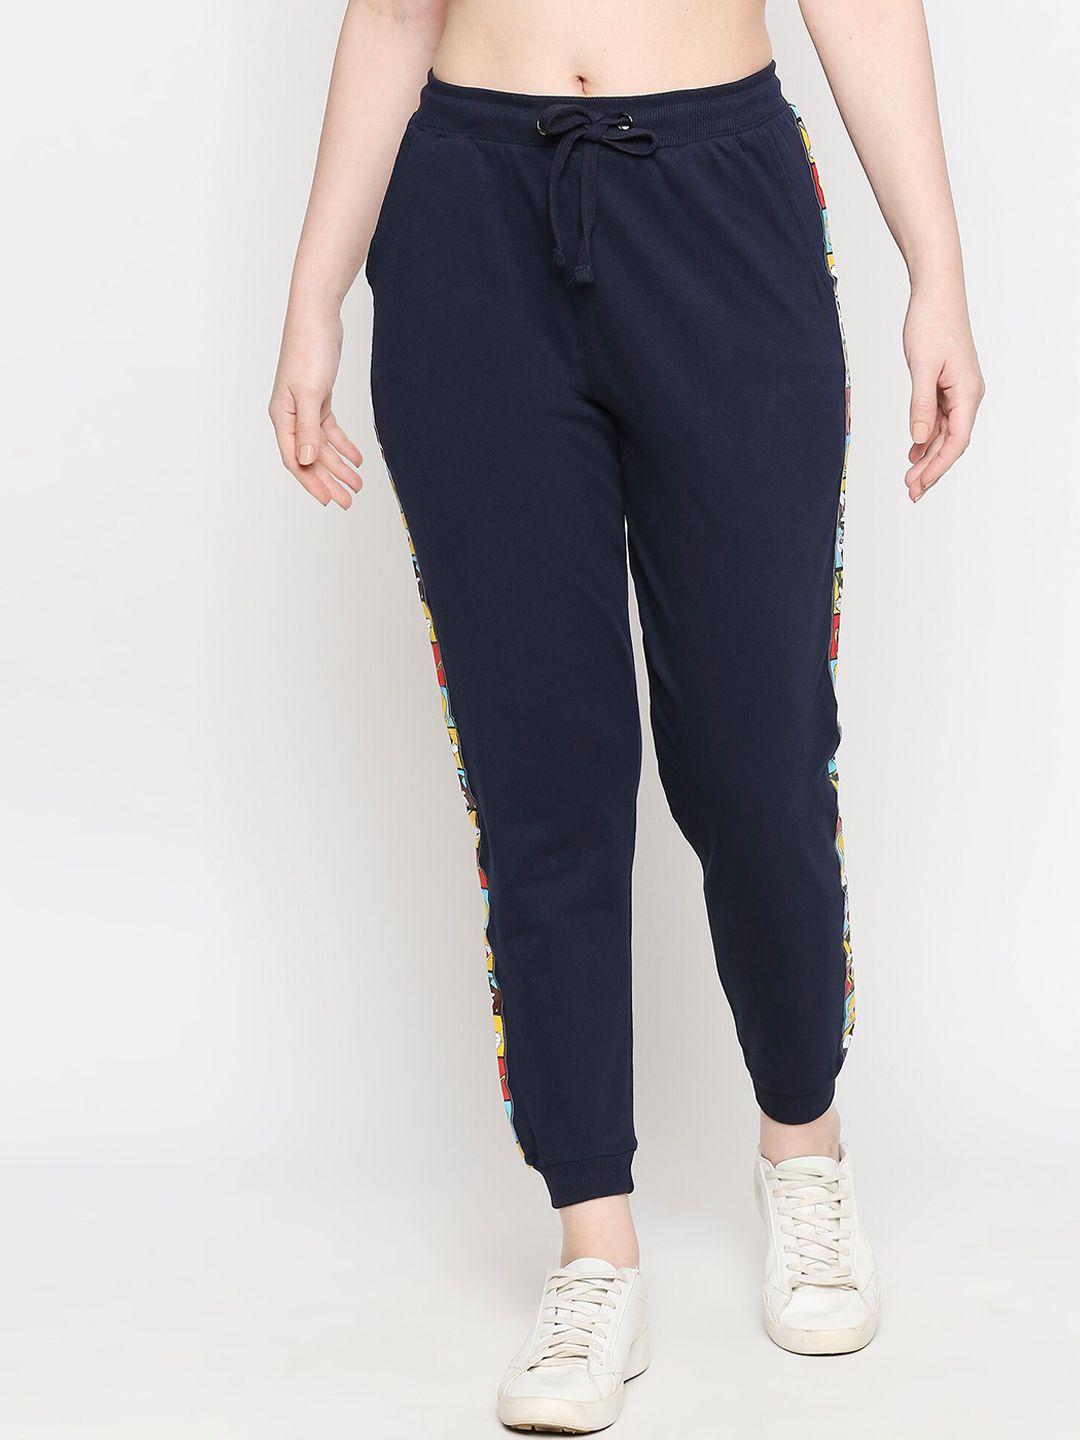 the souled store women navy blue solid slim fit joggers